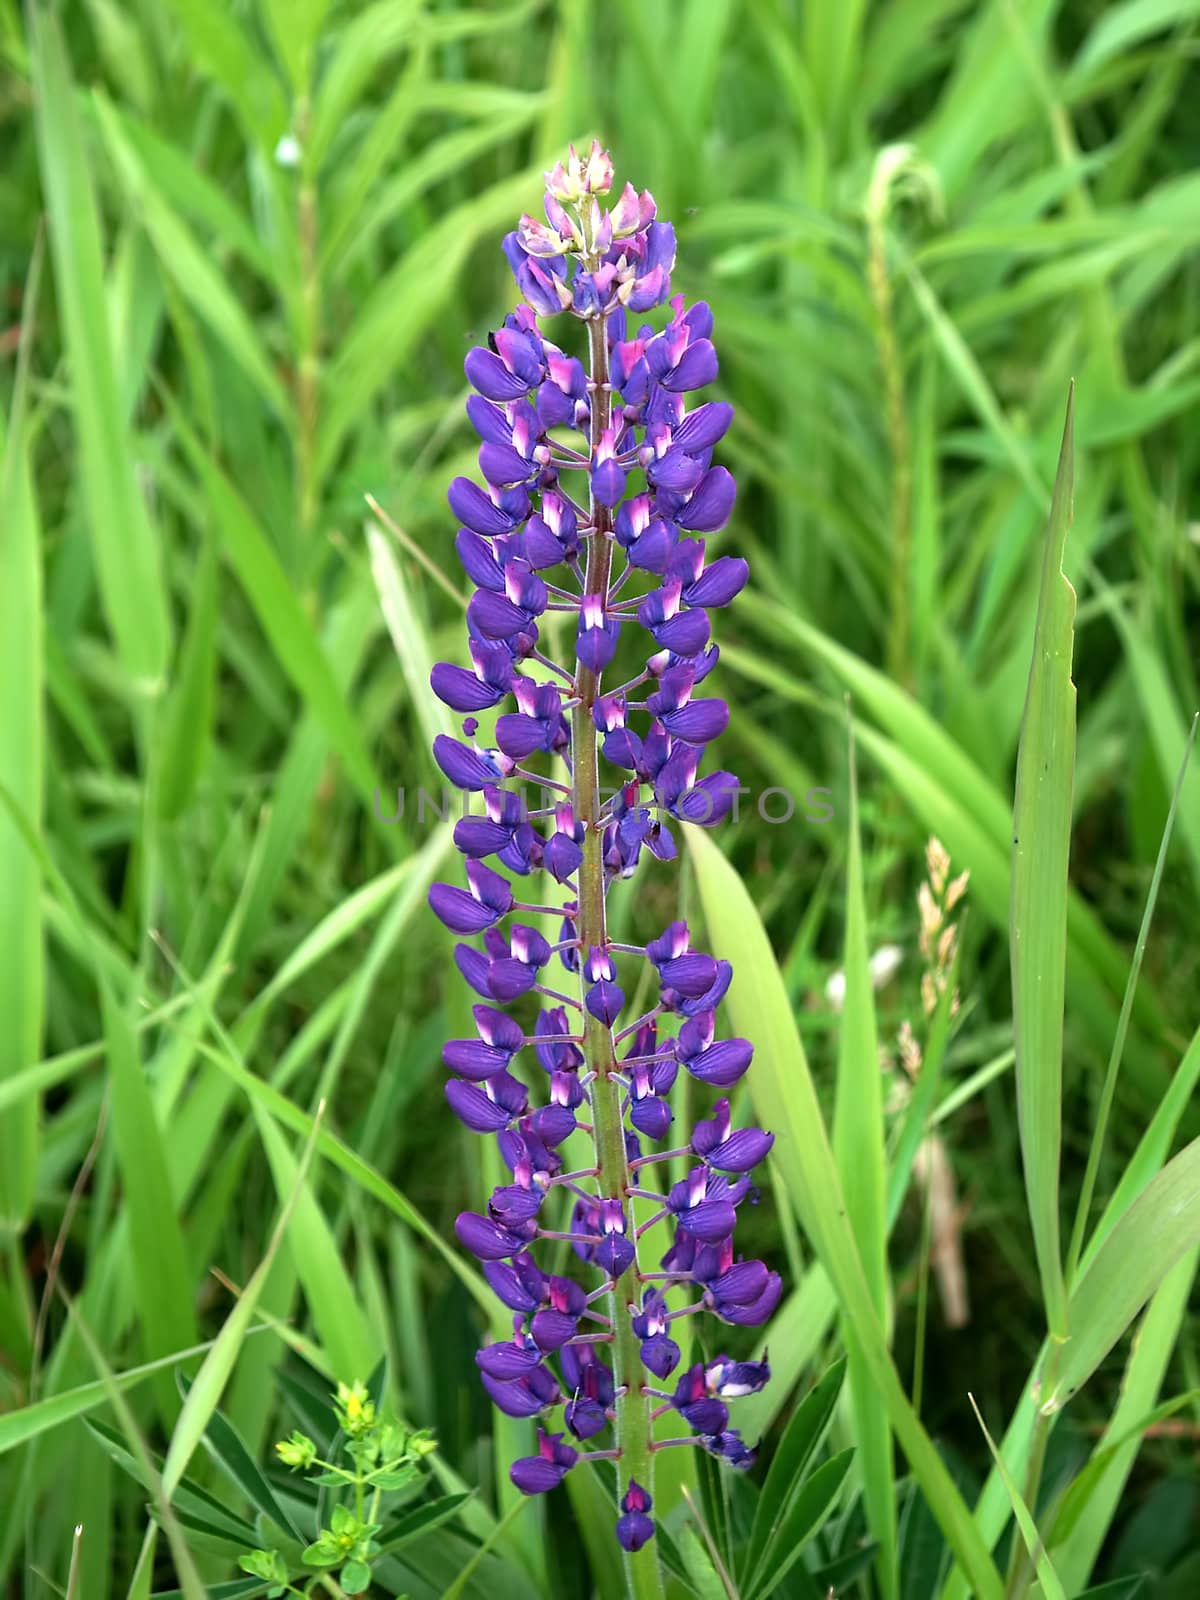 Lupine Flower in Michigan by Wirepec